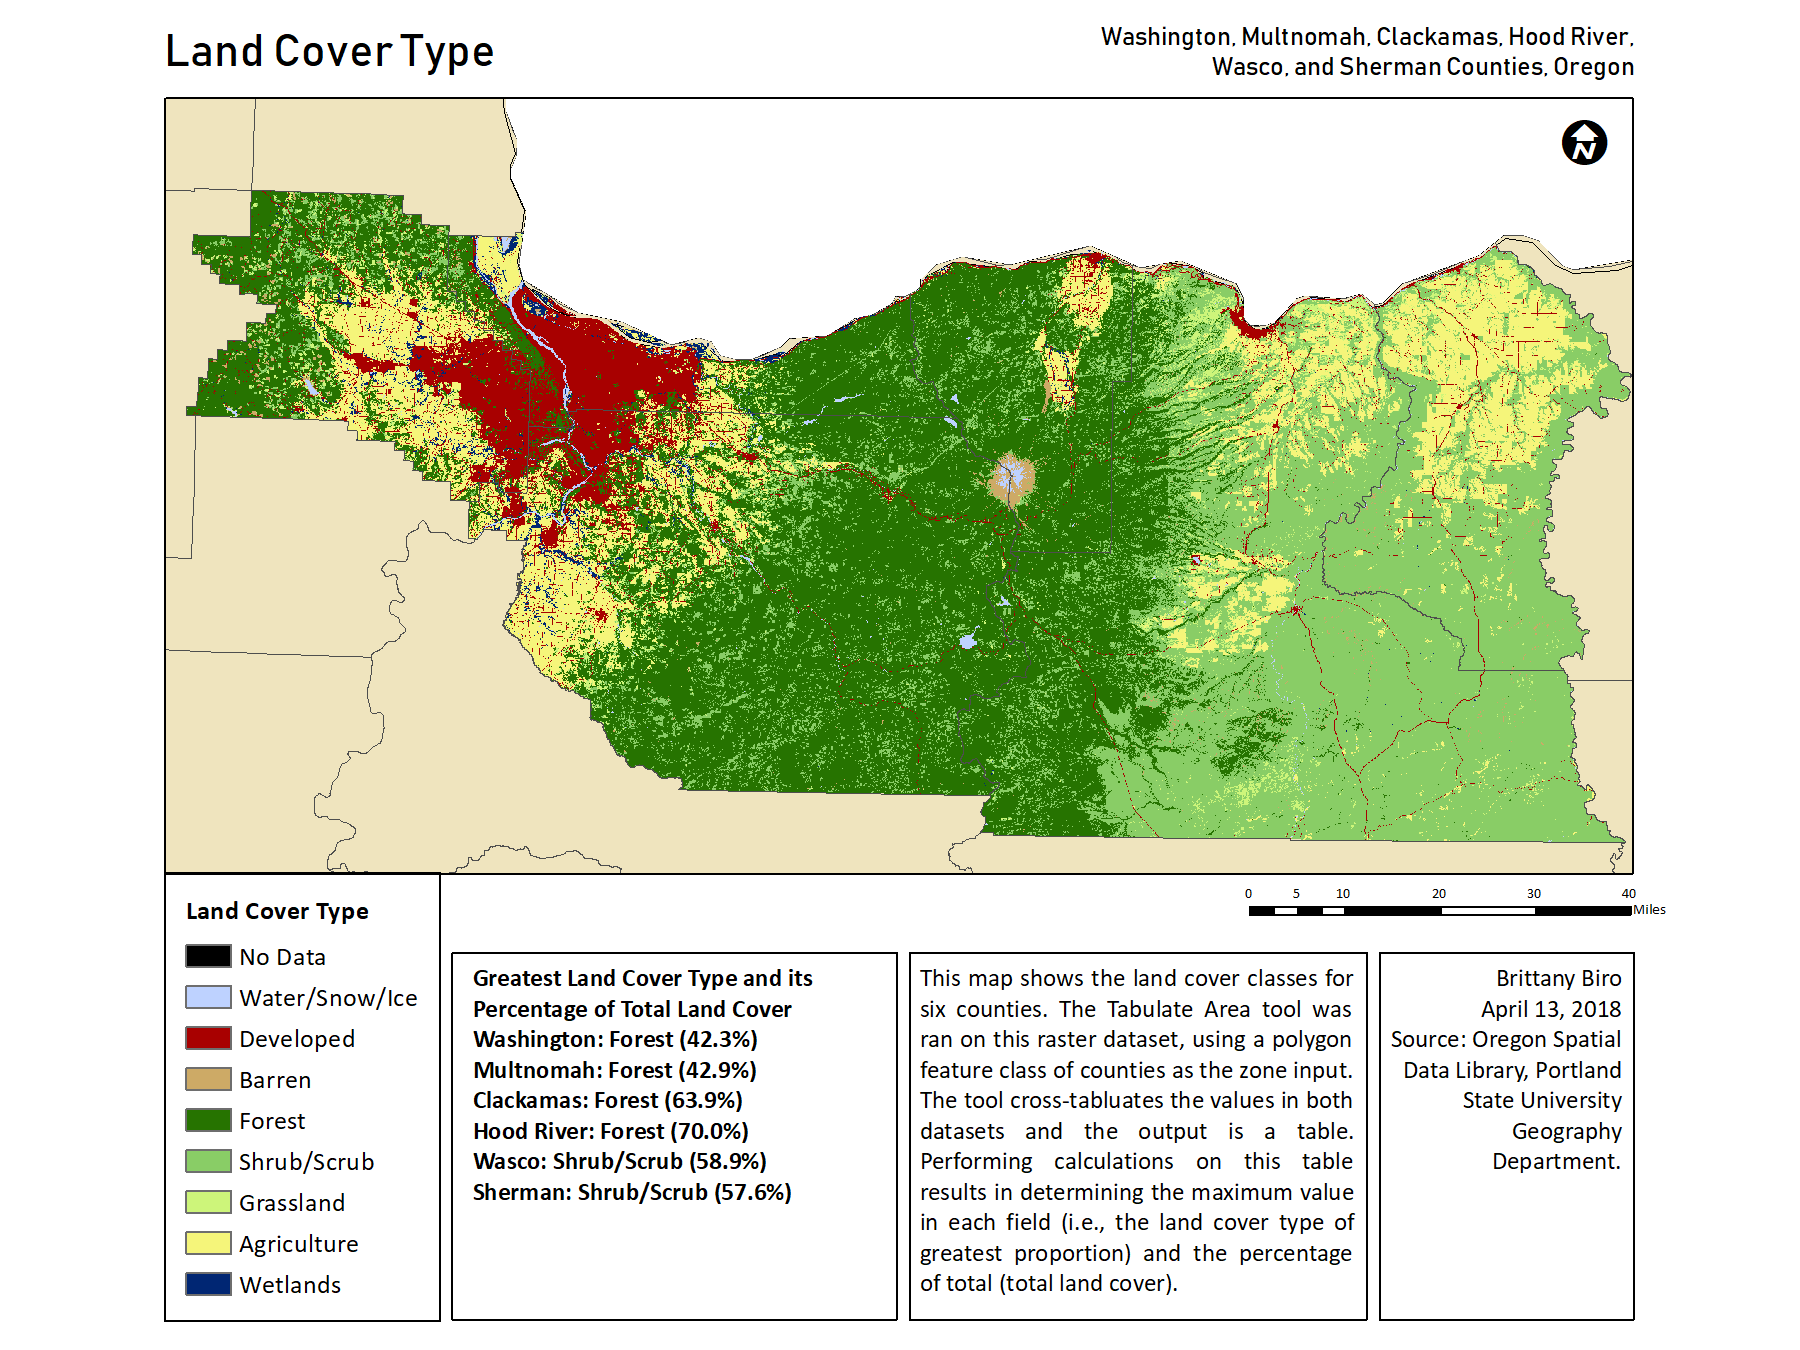 Land Cover Types in Oregon Counties